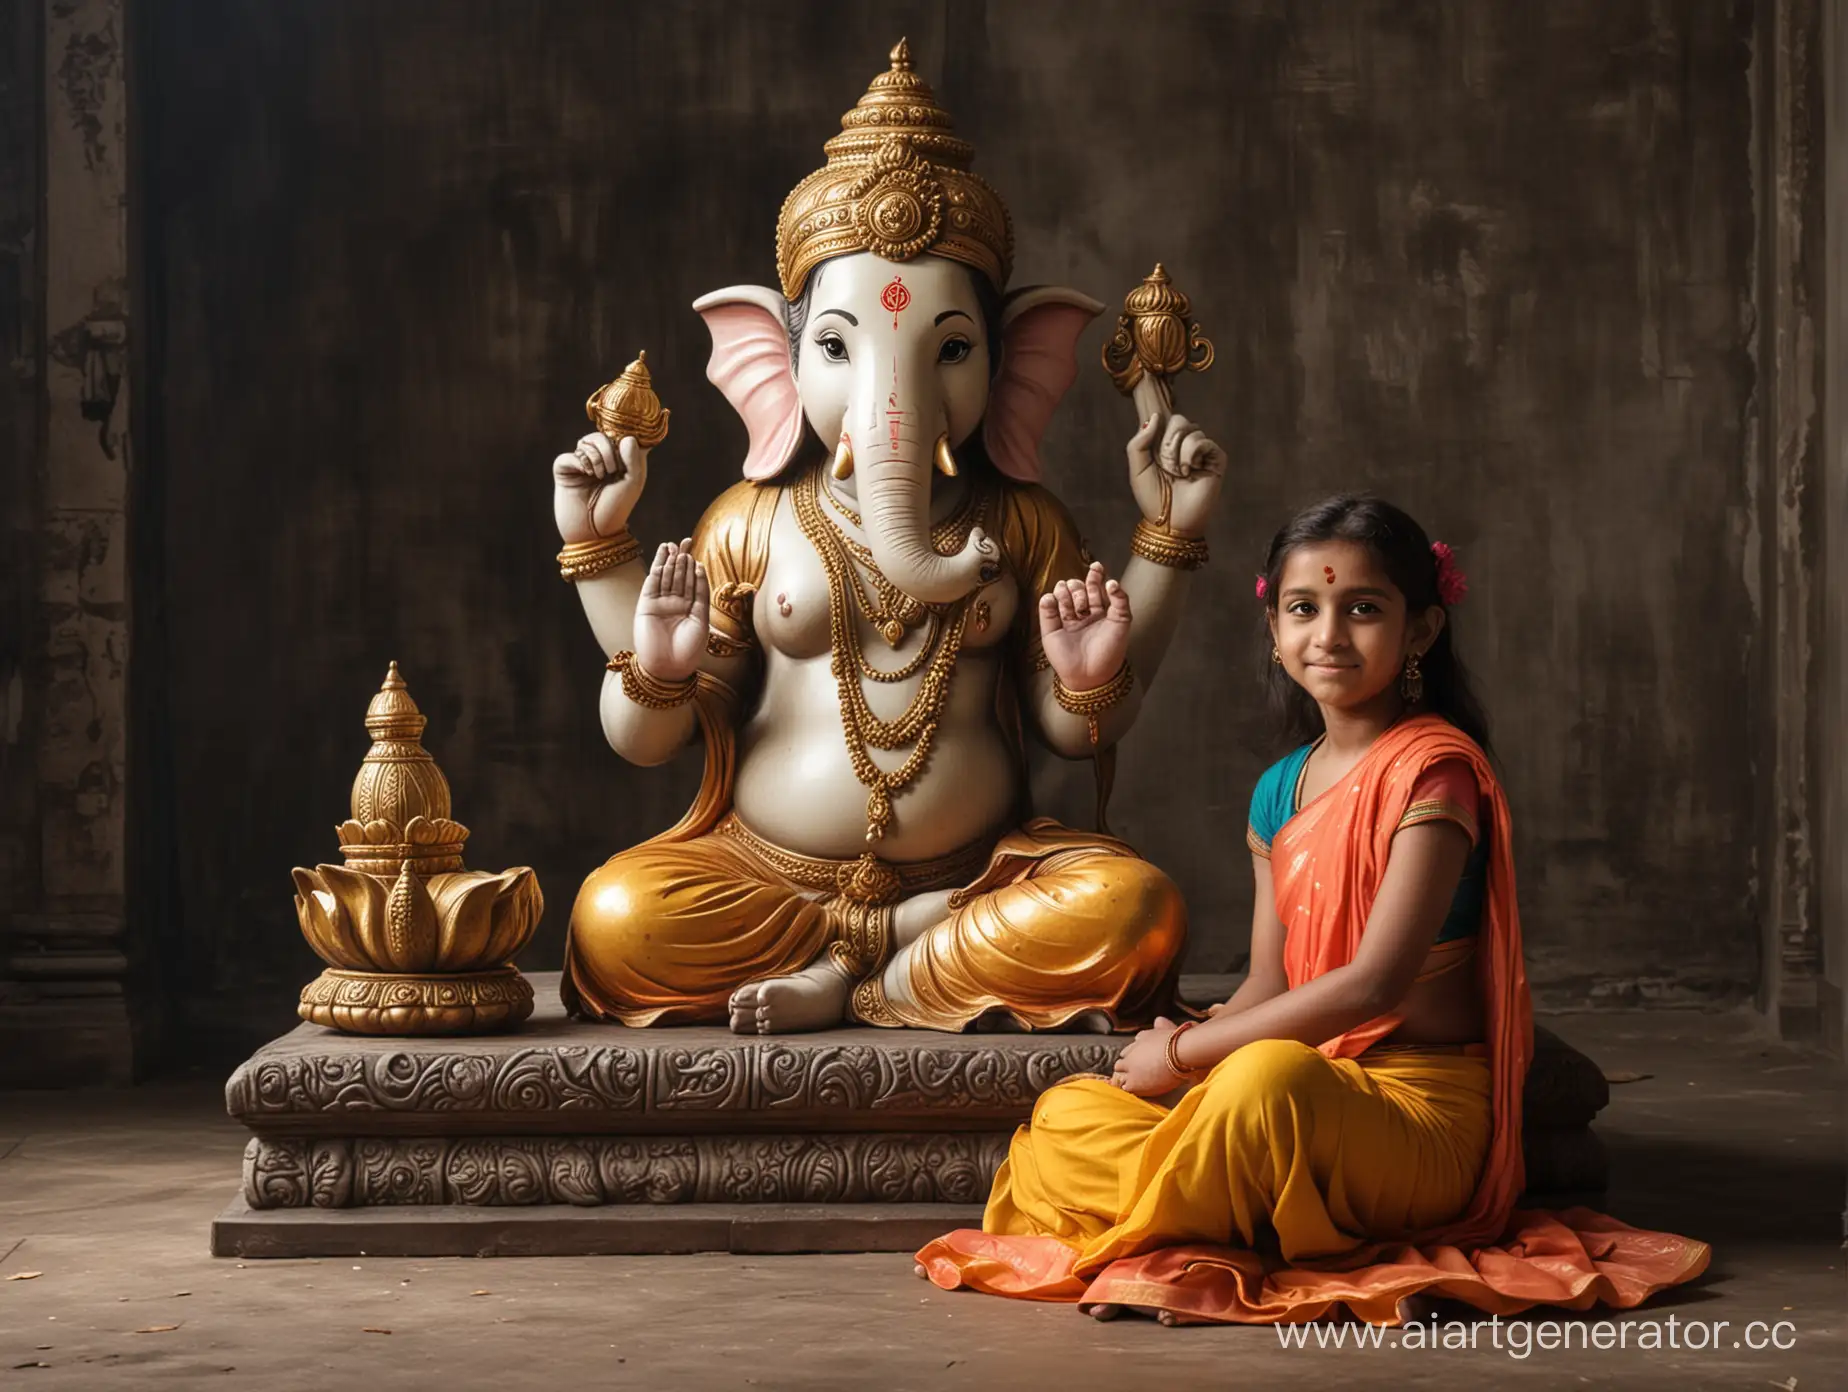 Young-Girl-Sitting-Next-to-Lord-Ganesha